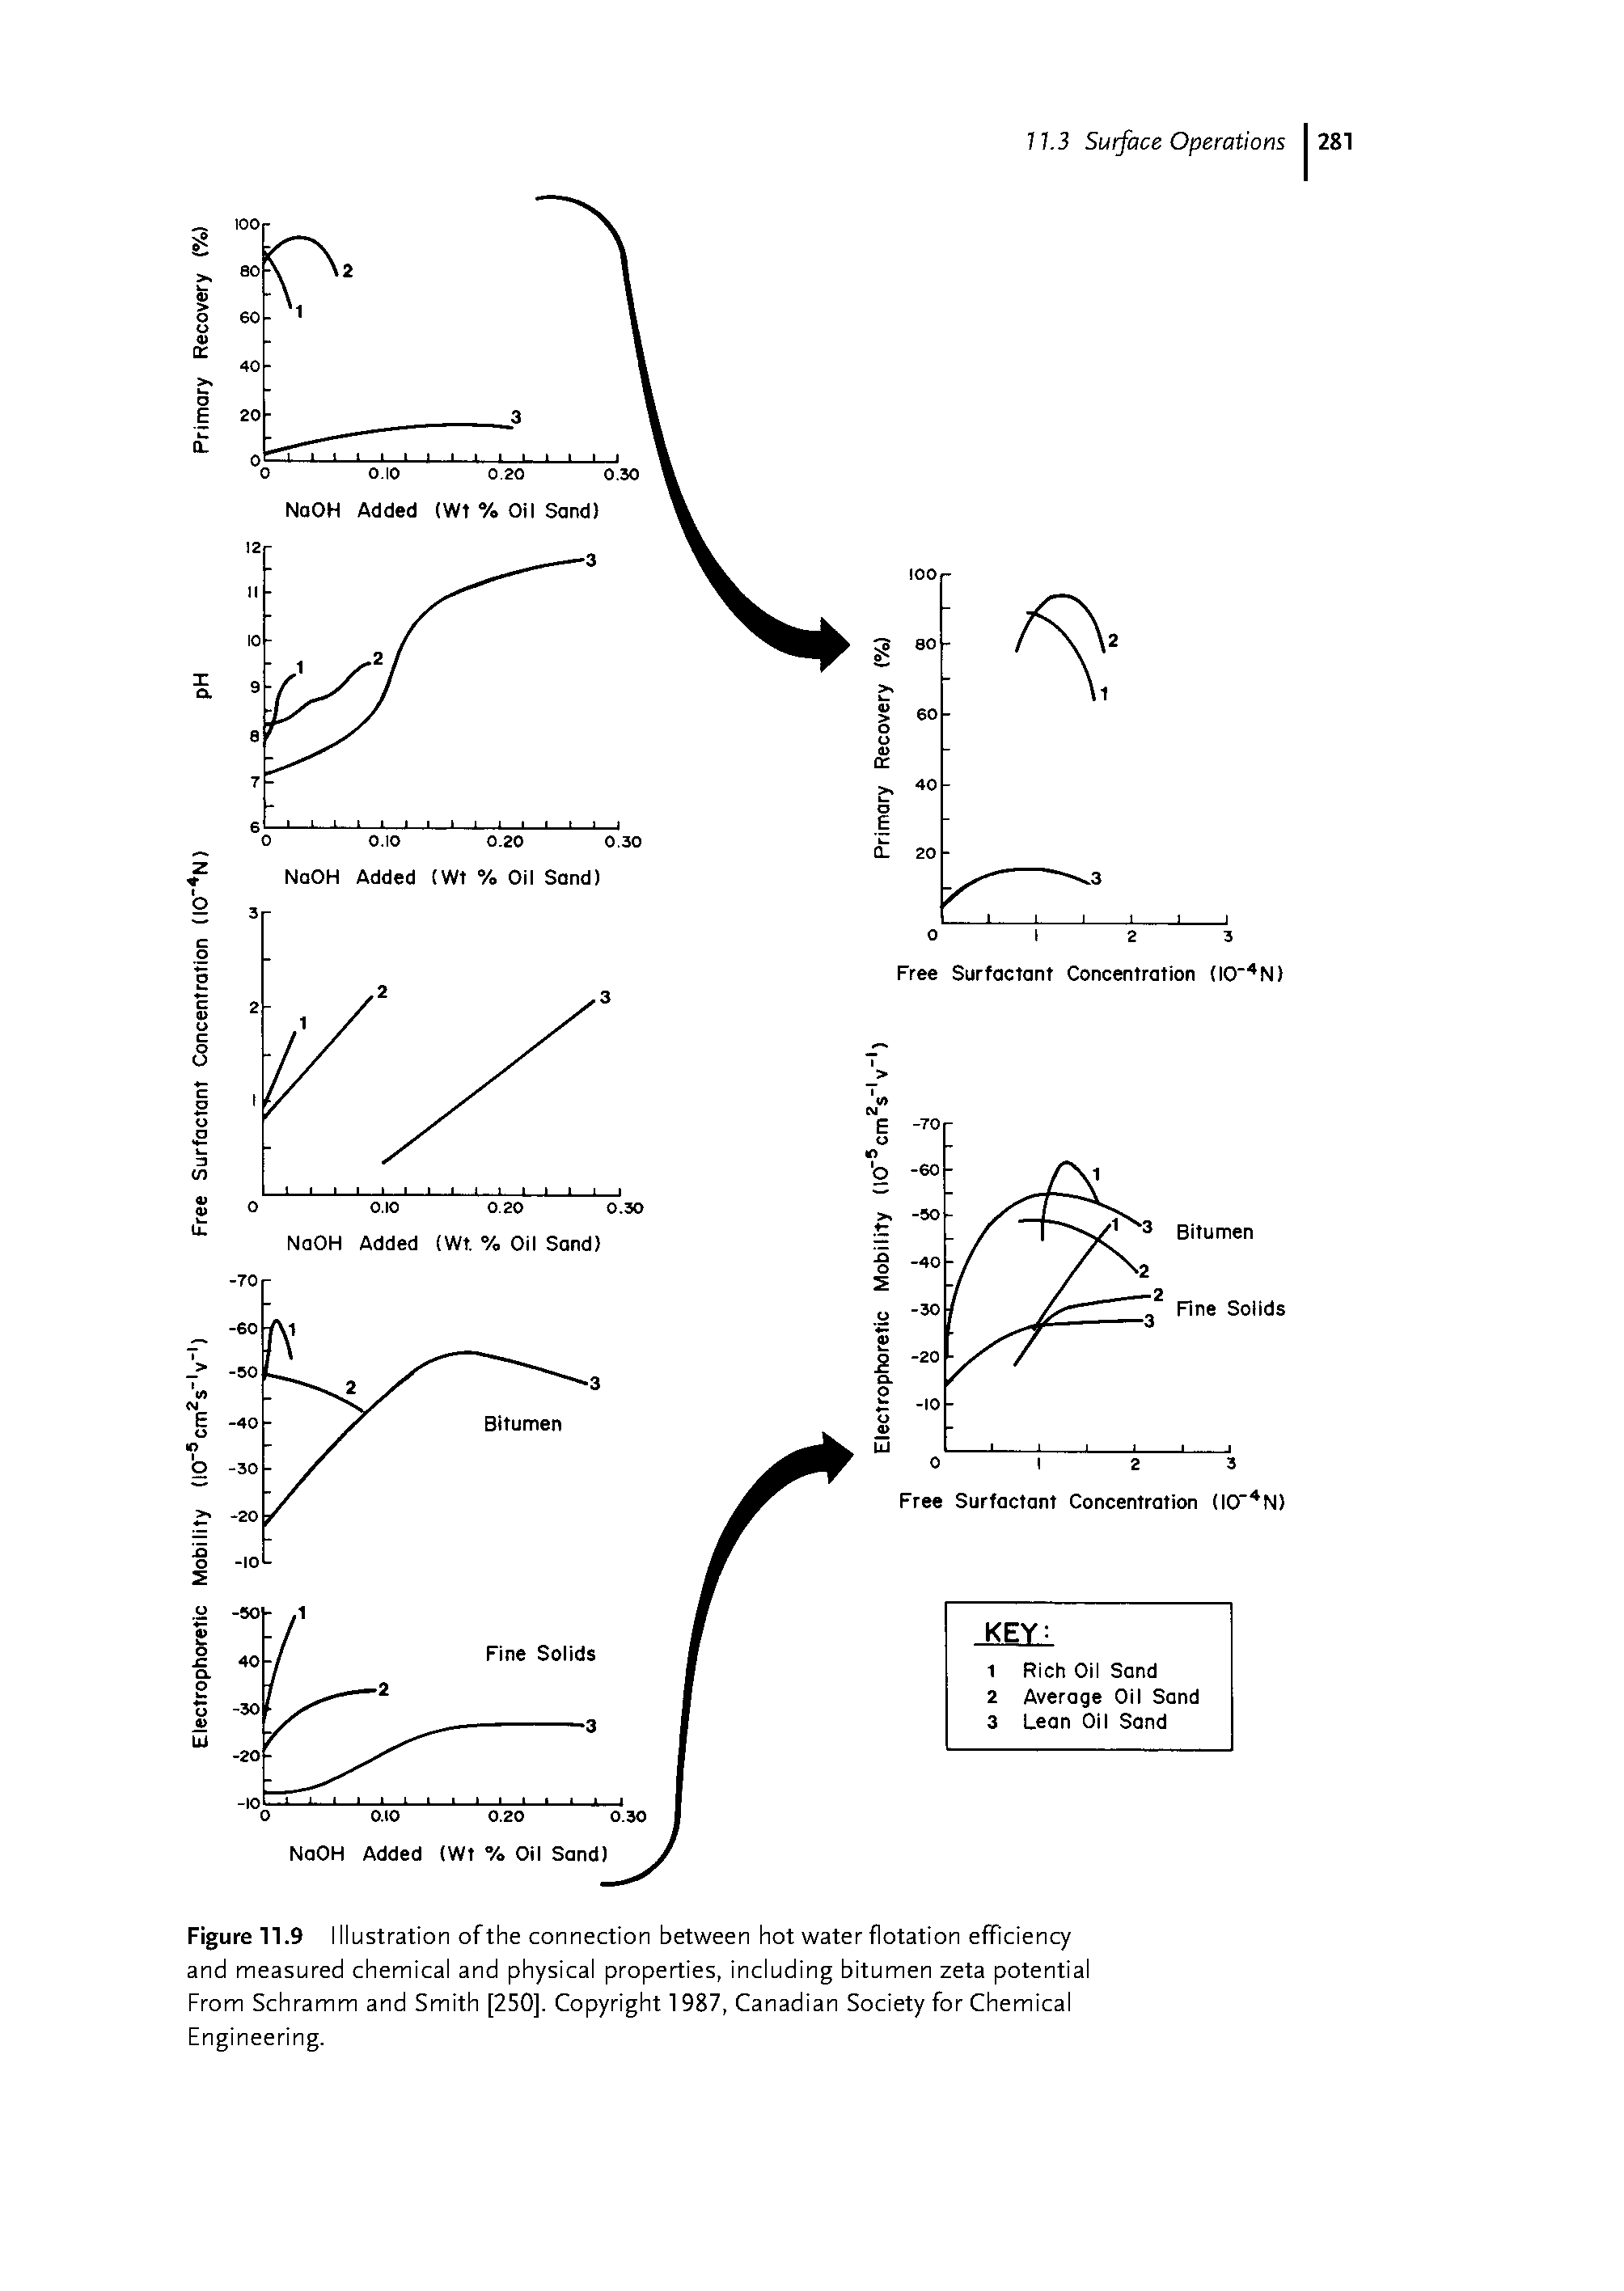 Figure 11.9 I llustration of the connection between hot water flotation efficiency and measured chemical and physical properties, including bitumen zeta potential From Schramm and Smith [250]. Copyright 1987, Canadian Society for Chemical Engineering.